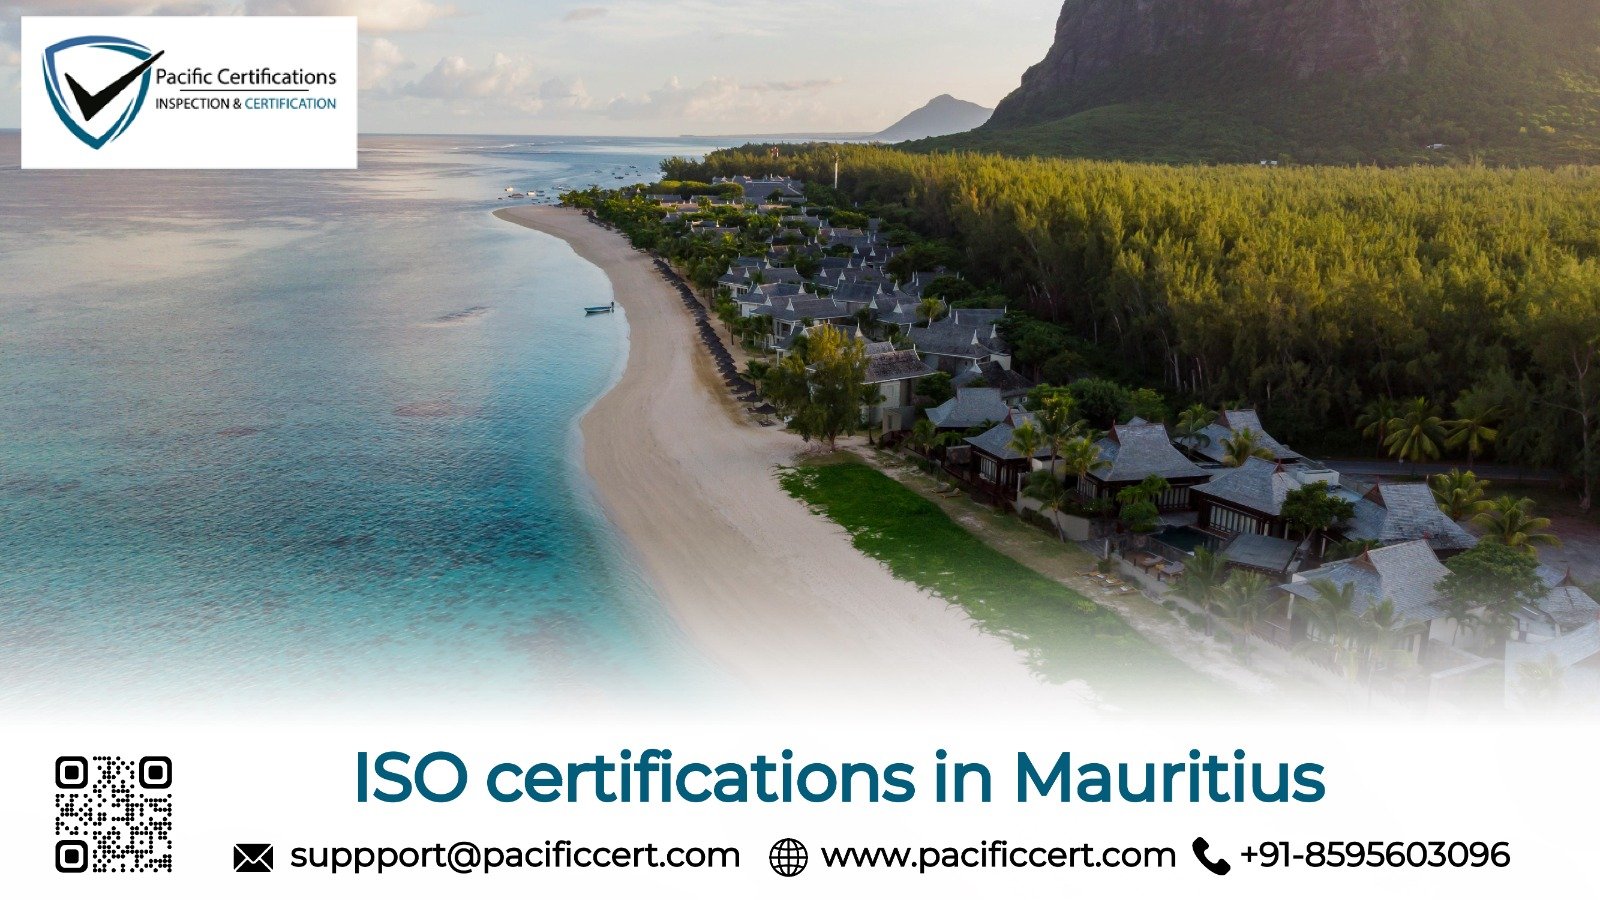 ISO Certifications in Mauritius and How Pacific Certifications can help